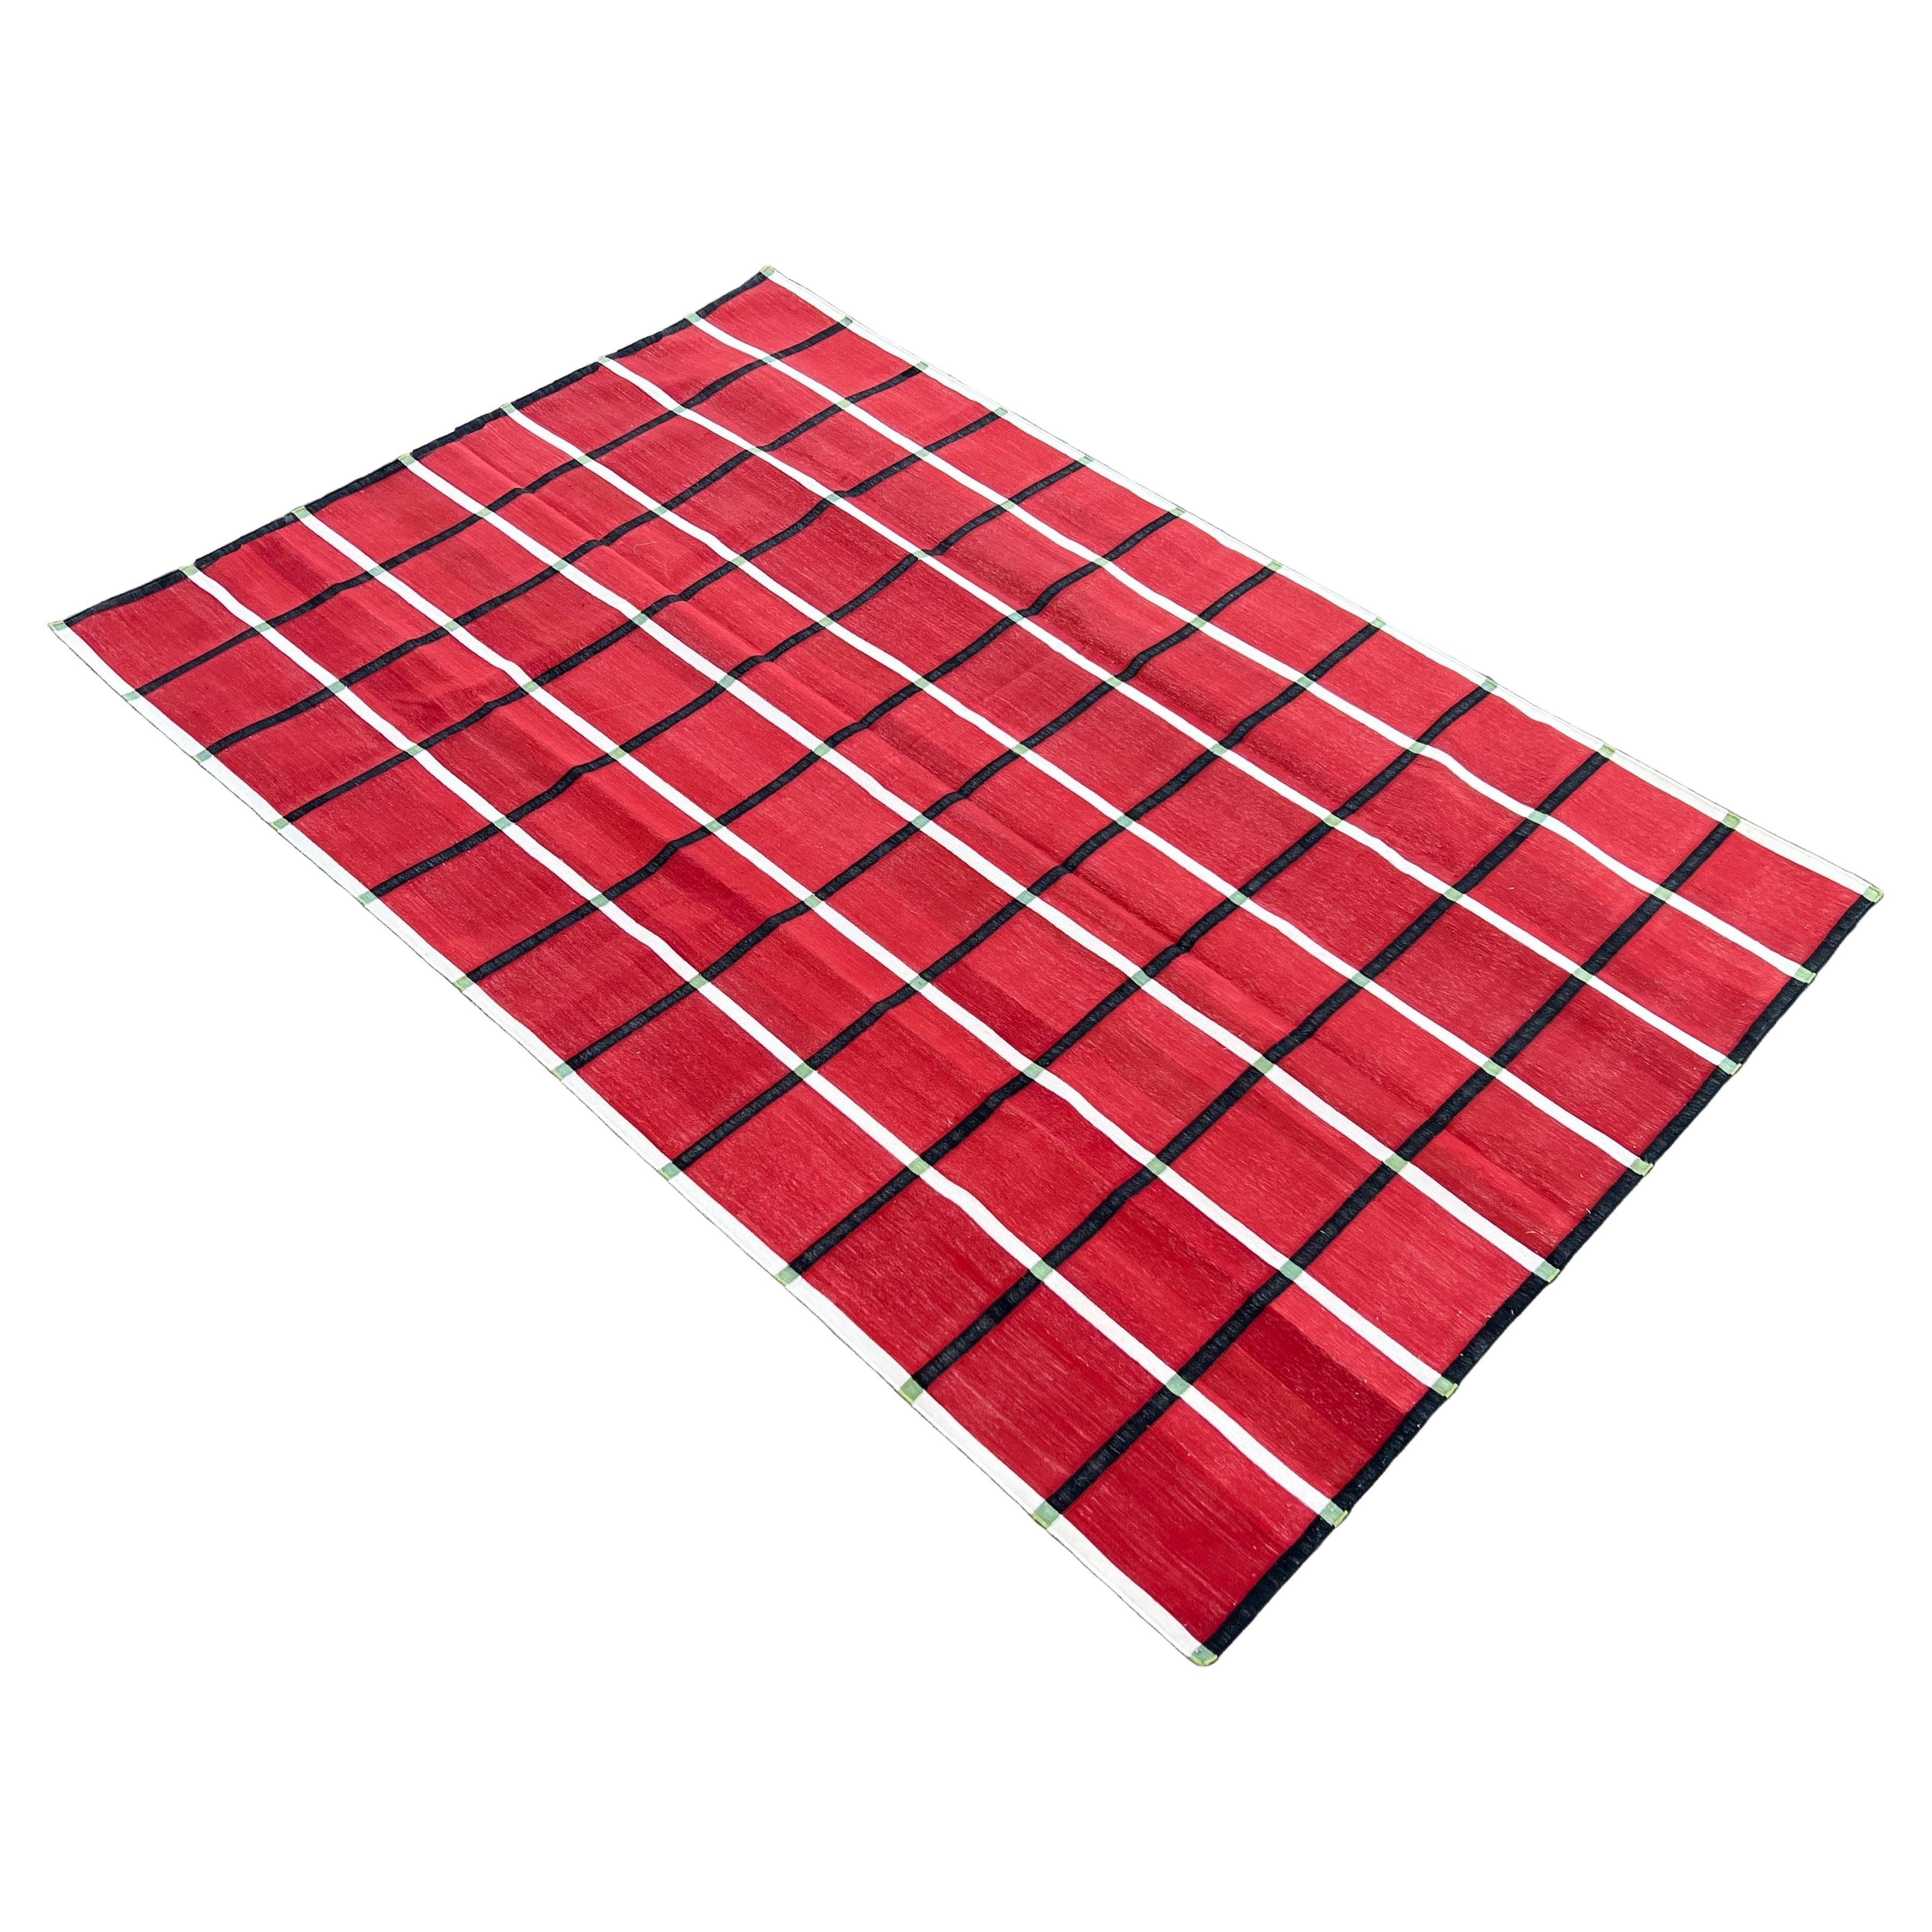 Handmade Cotton Area Flat Weave Rug, Red & Black Windowpane Check Indian Dhurrie For Sale